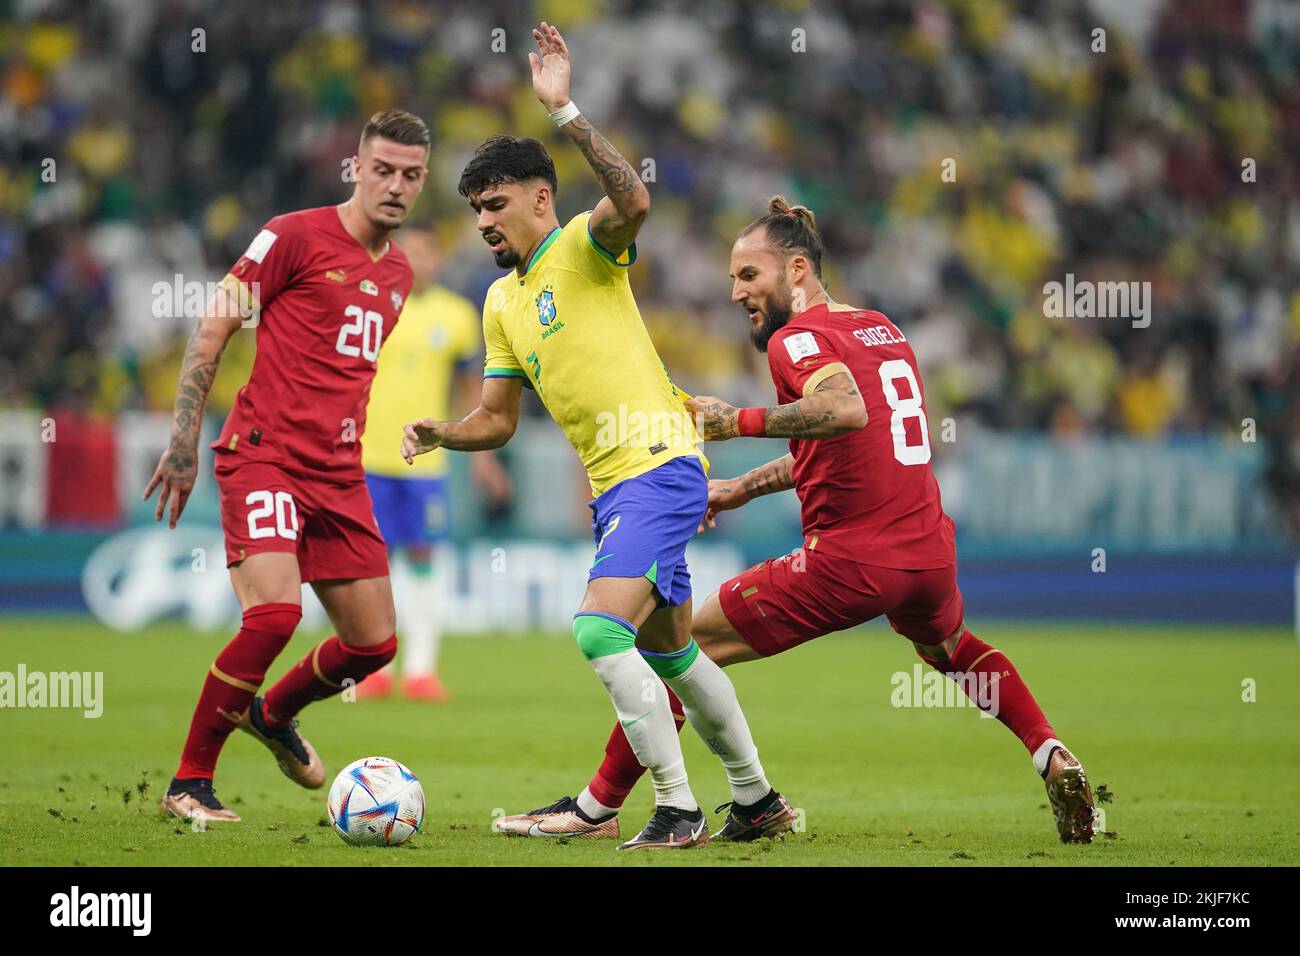 LUSAIL, QATAR - NOVEMBER 24: Player of Brazil Lucas Paquetá fights for the ball with player of Serbia Nemanja Gudelj during the FIFA World Cup Qatar 2022 group G match between Brazil and Serbia at Lusail Stadium on November 24, 2022 in Lusail, Qatar. (Photo by Florencia Tan Jun/PxImages) Credit: Px Images/Alamy Live News Stock Photo